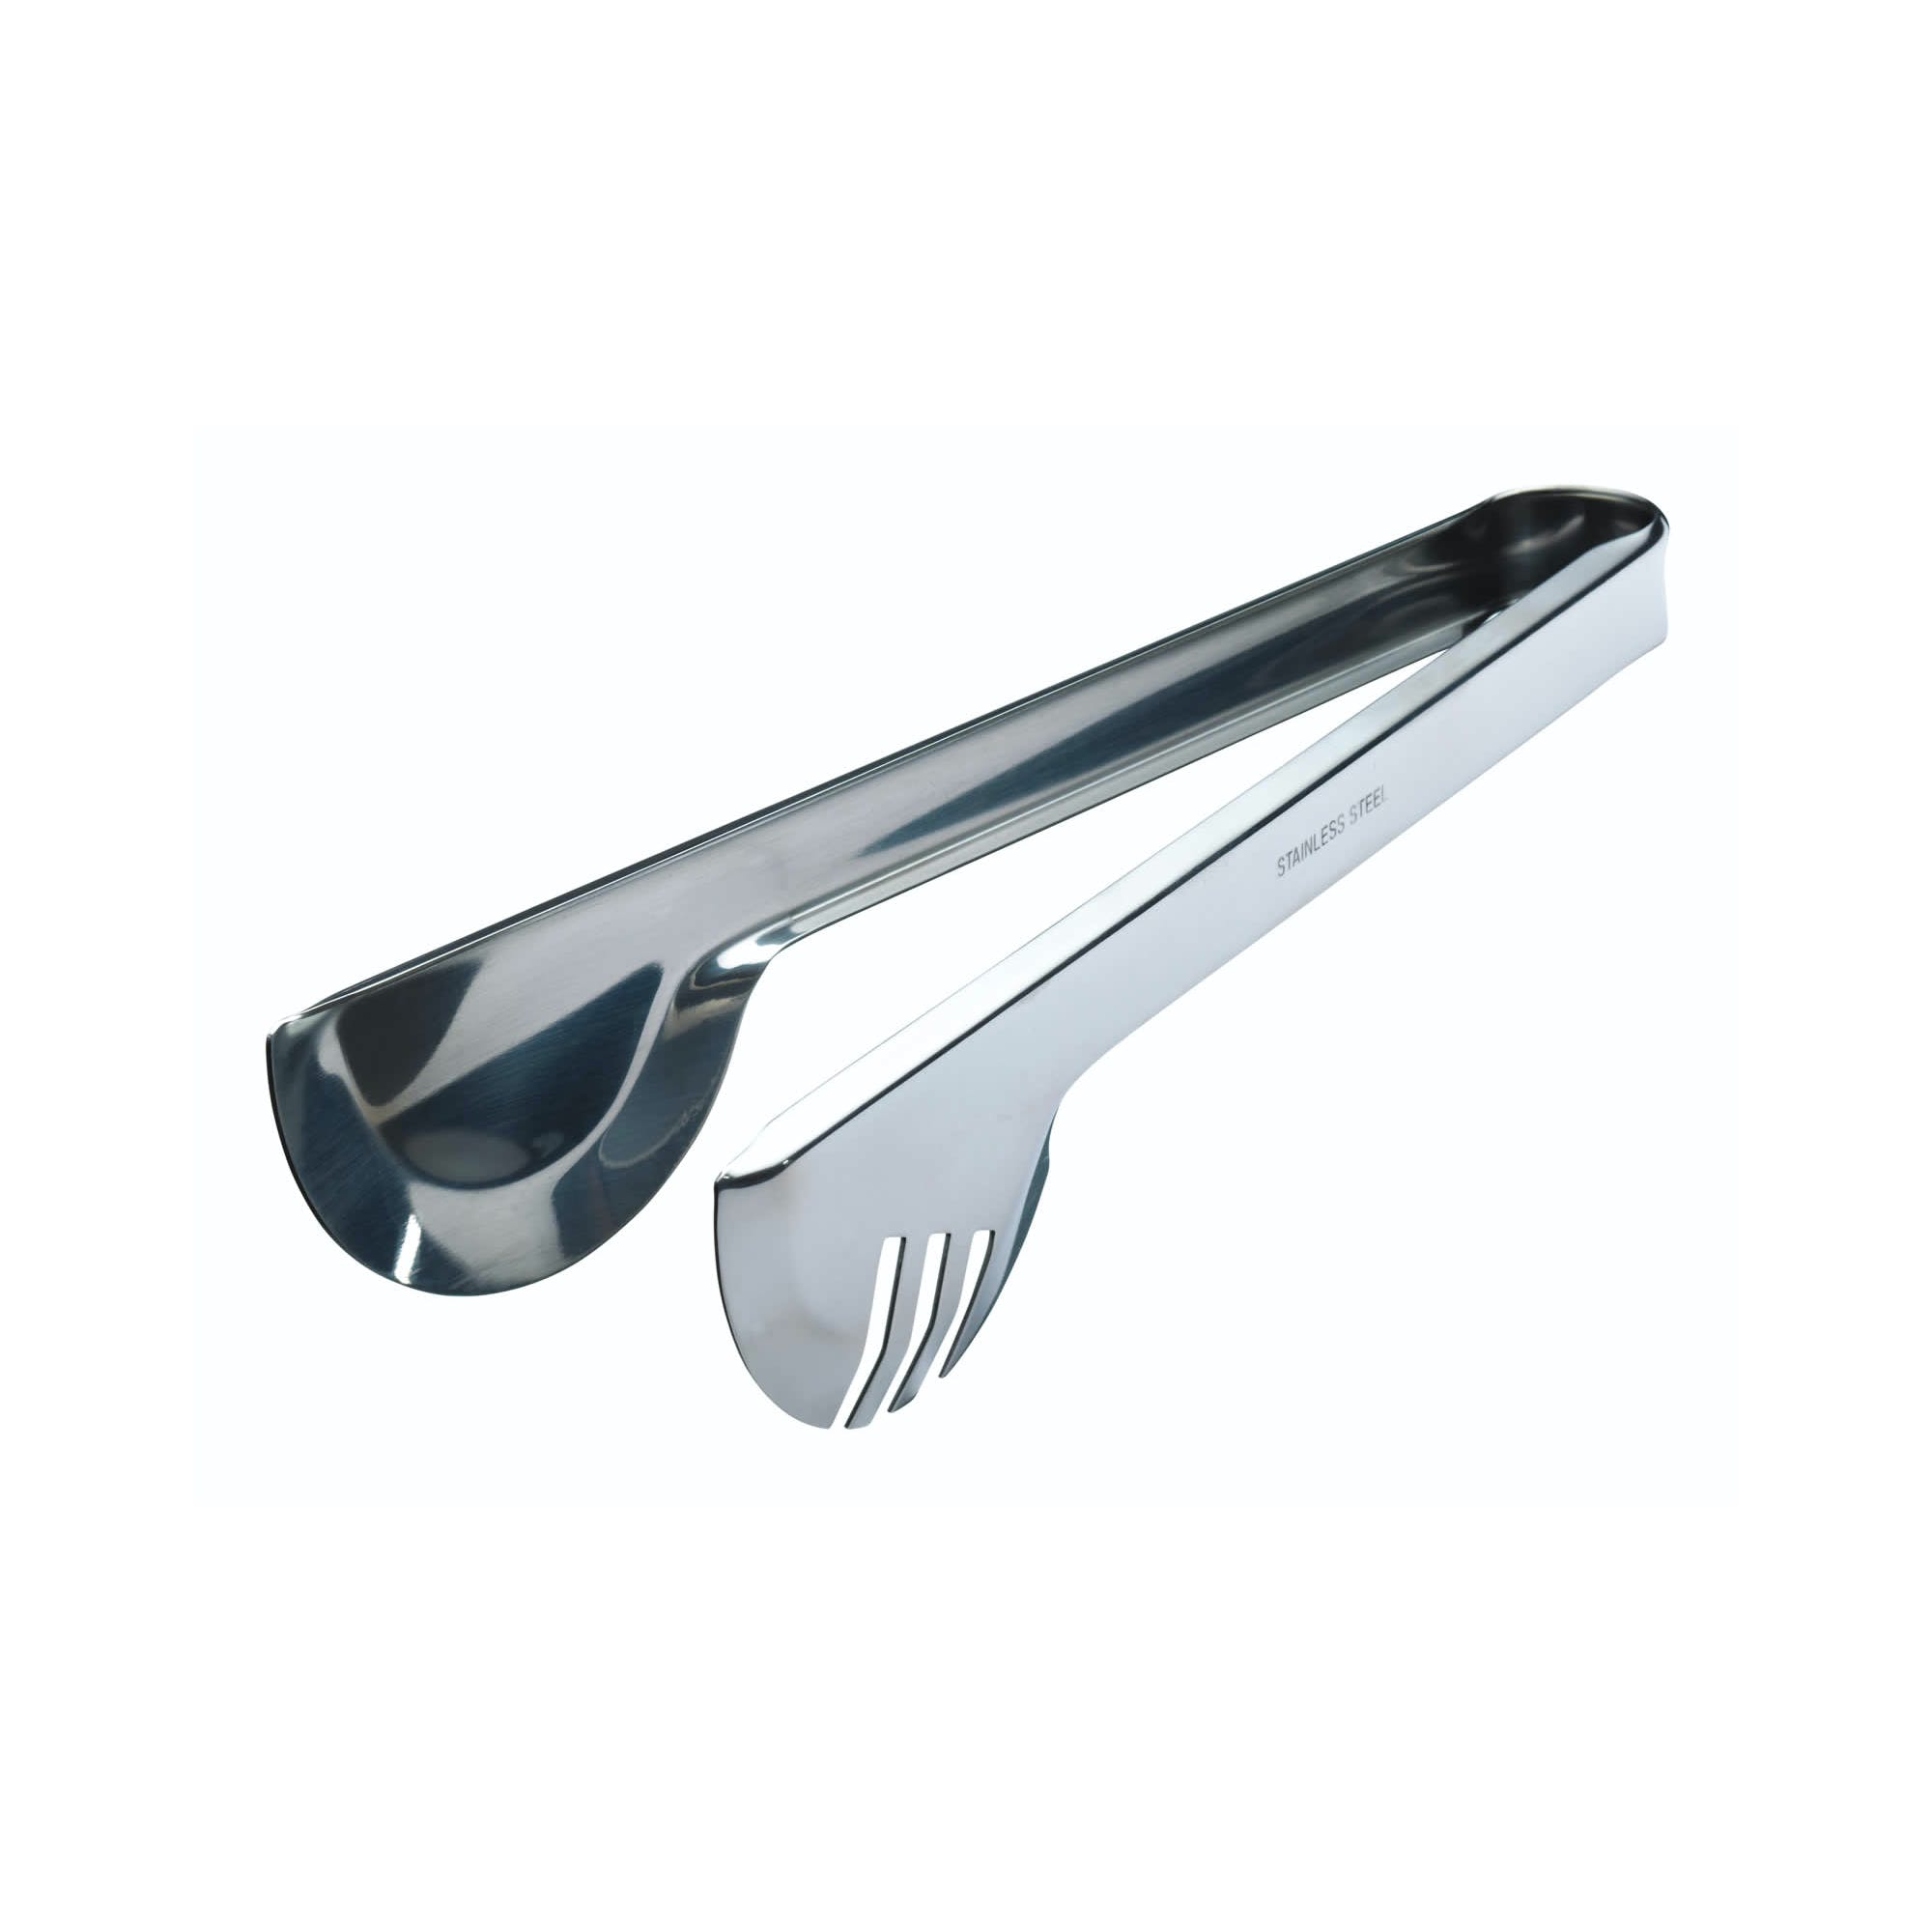 KitchenCraft Stainless Steel Deluxe 24cm Serving Tongs - Kate's Cupboard